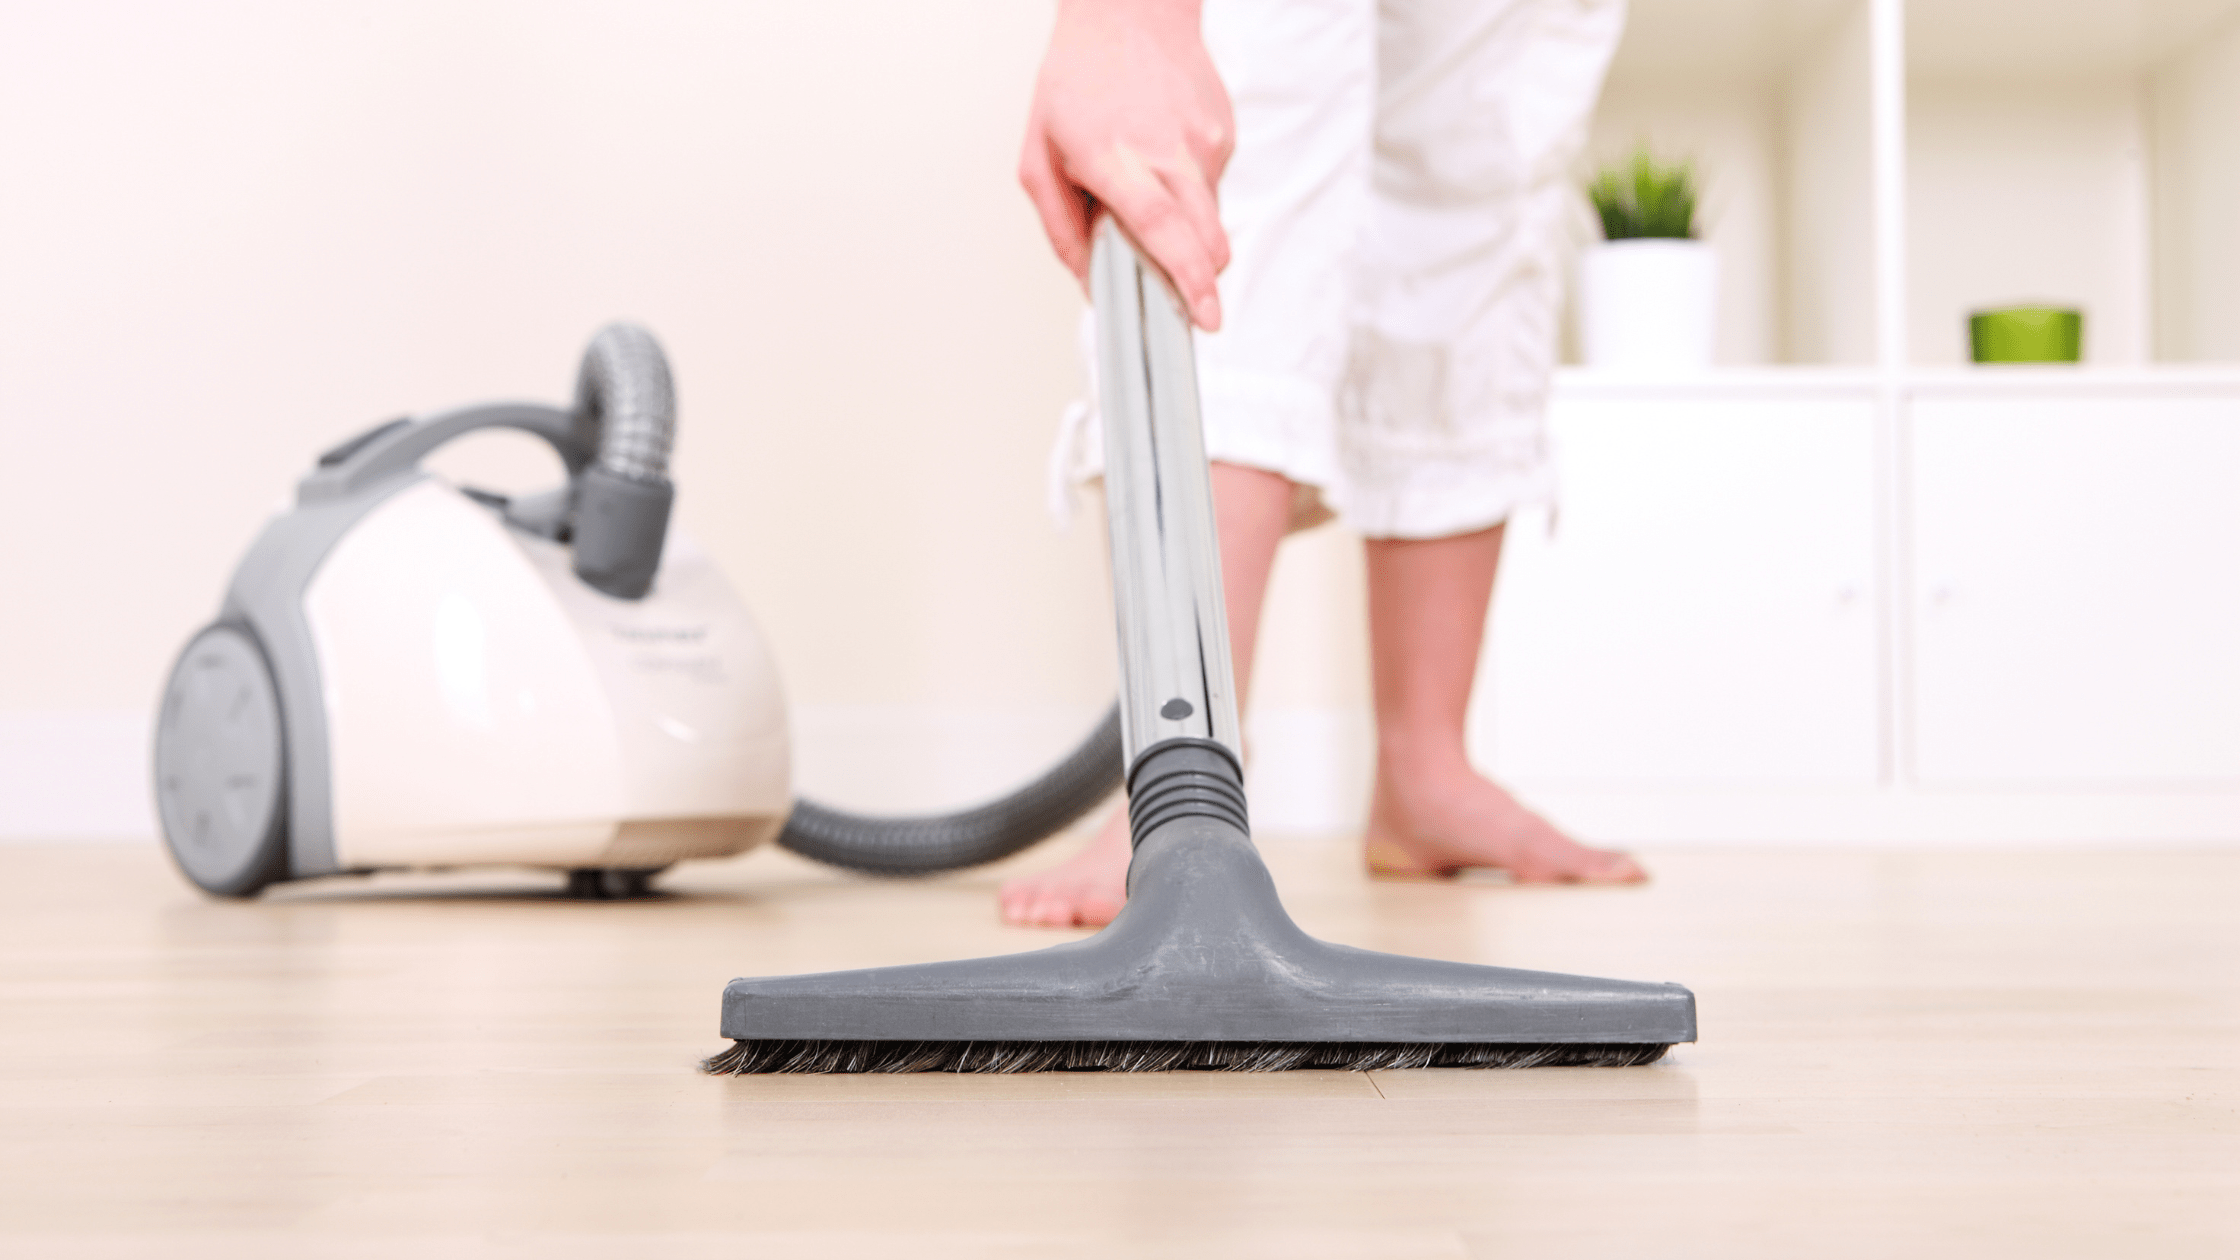 Things You Didn’t Know About Your Vacuum Cleaner